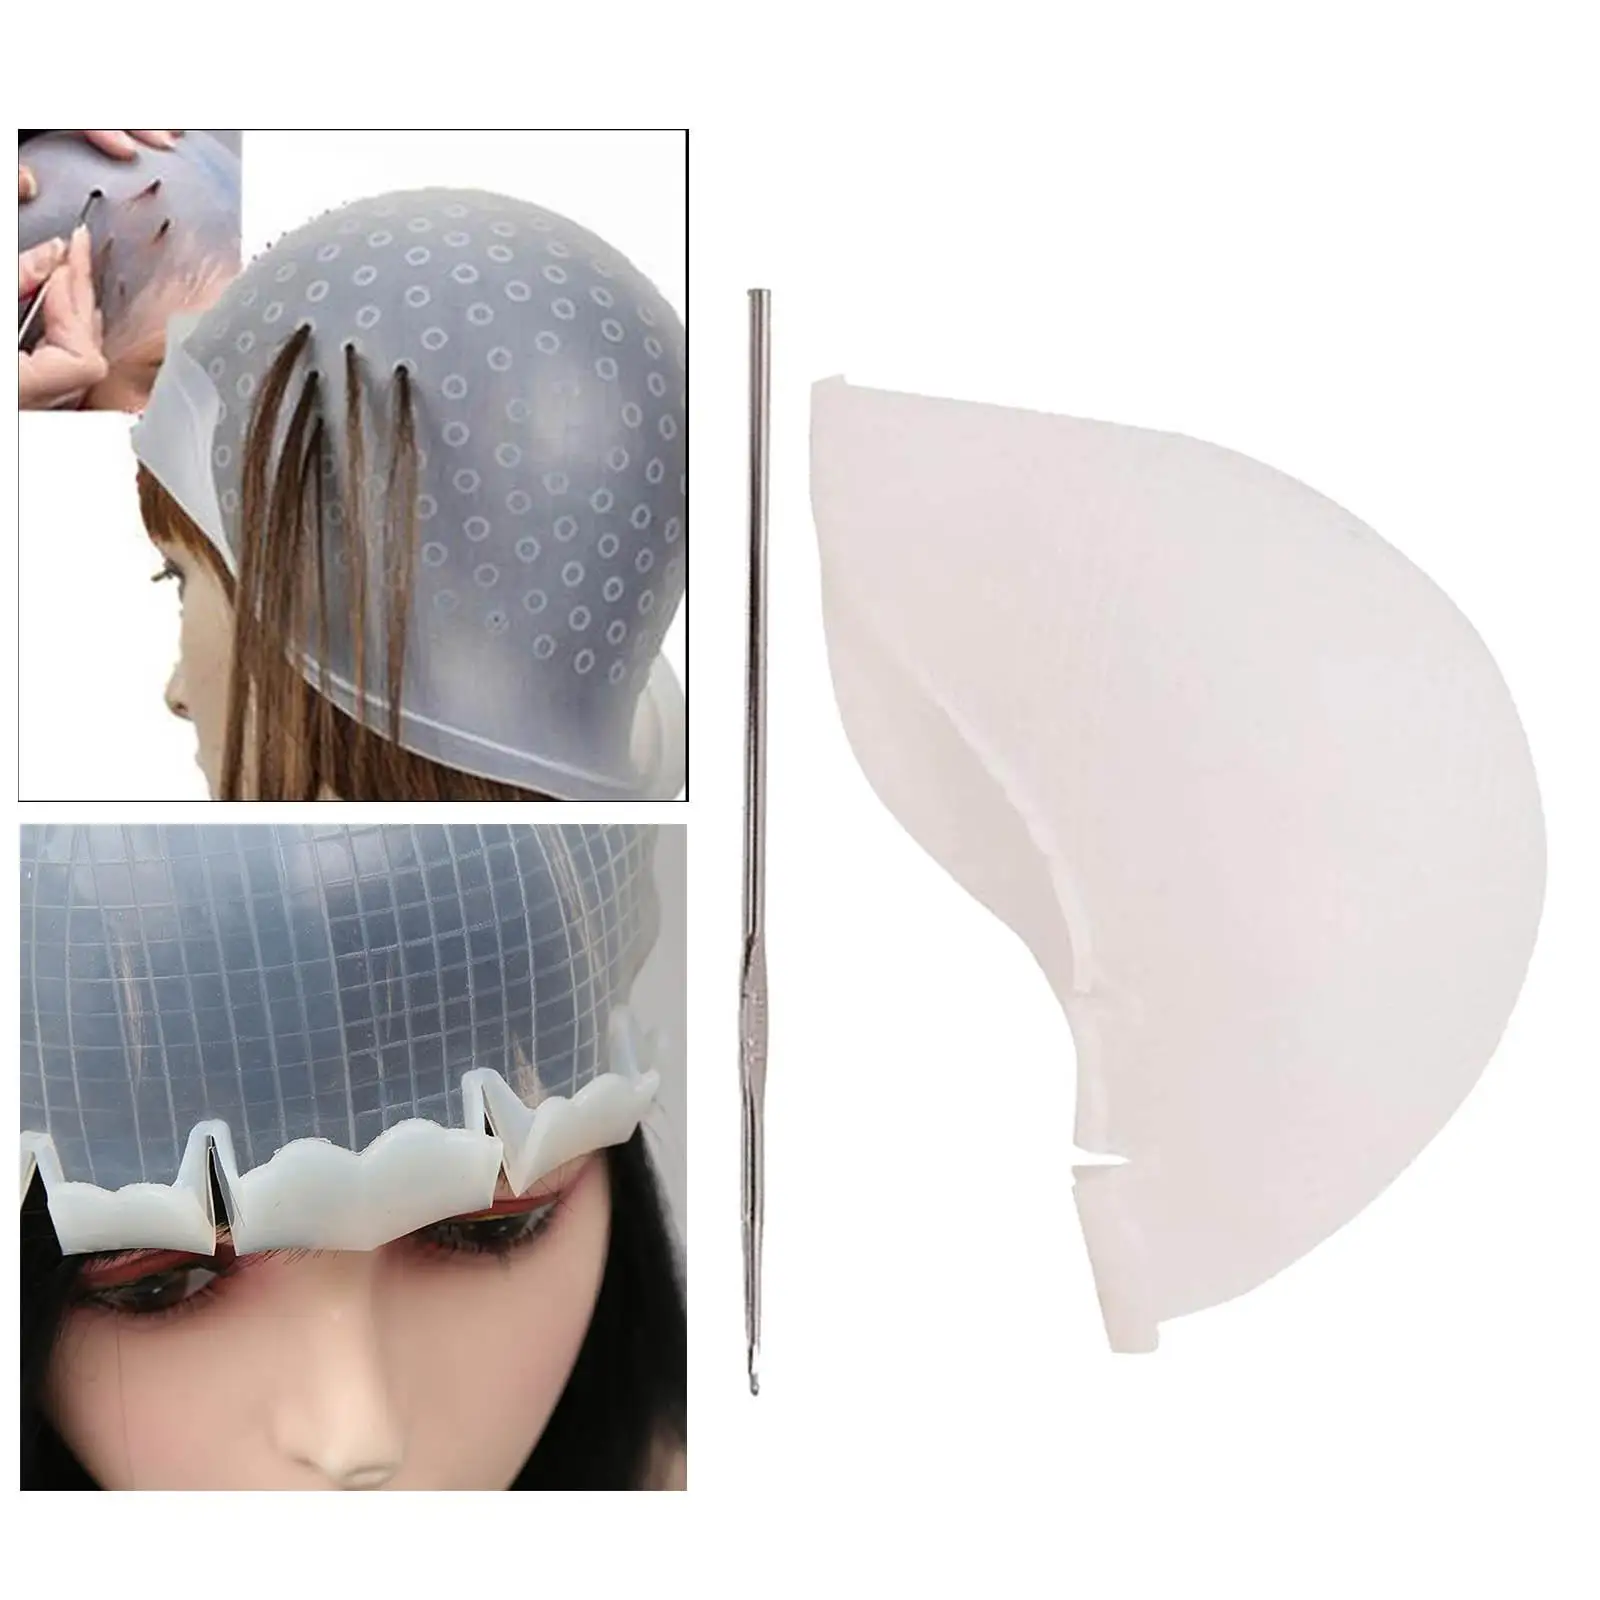 Silicone Hair Coloring Hat, Dye Hat Reusable Highlight Hat, for Hair Color Dyeing Hair